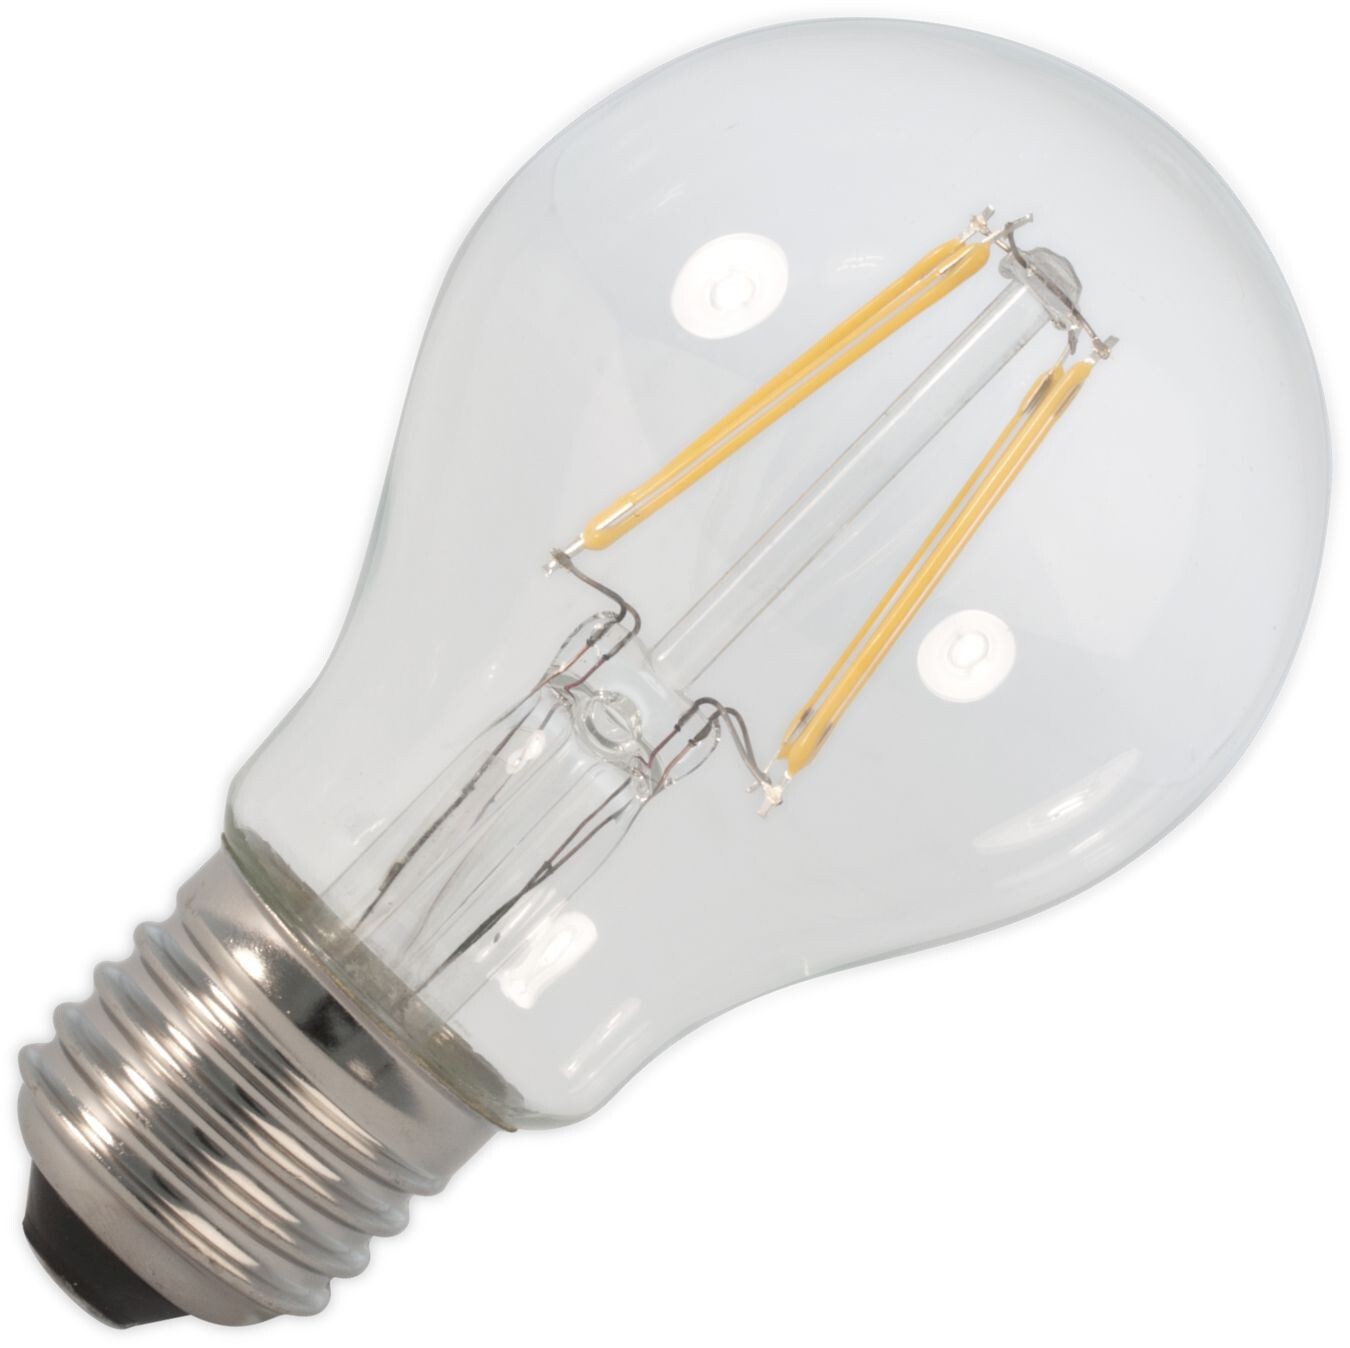 Bailey Standaardlamp LED filament 3W vervangt 25W grote fitting E27